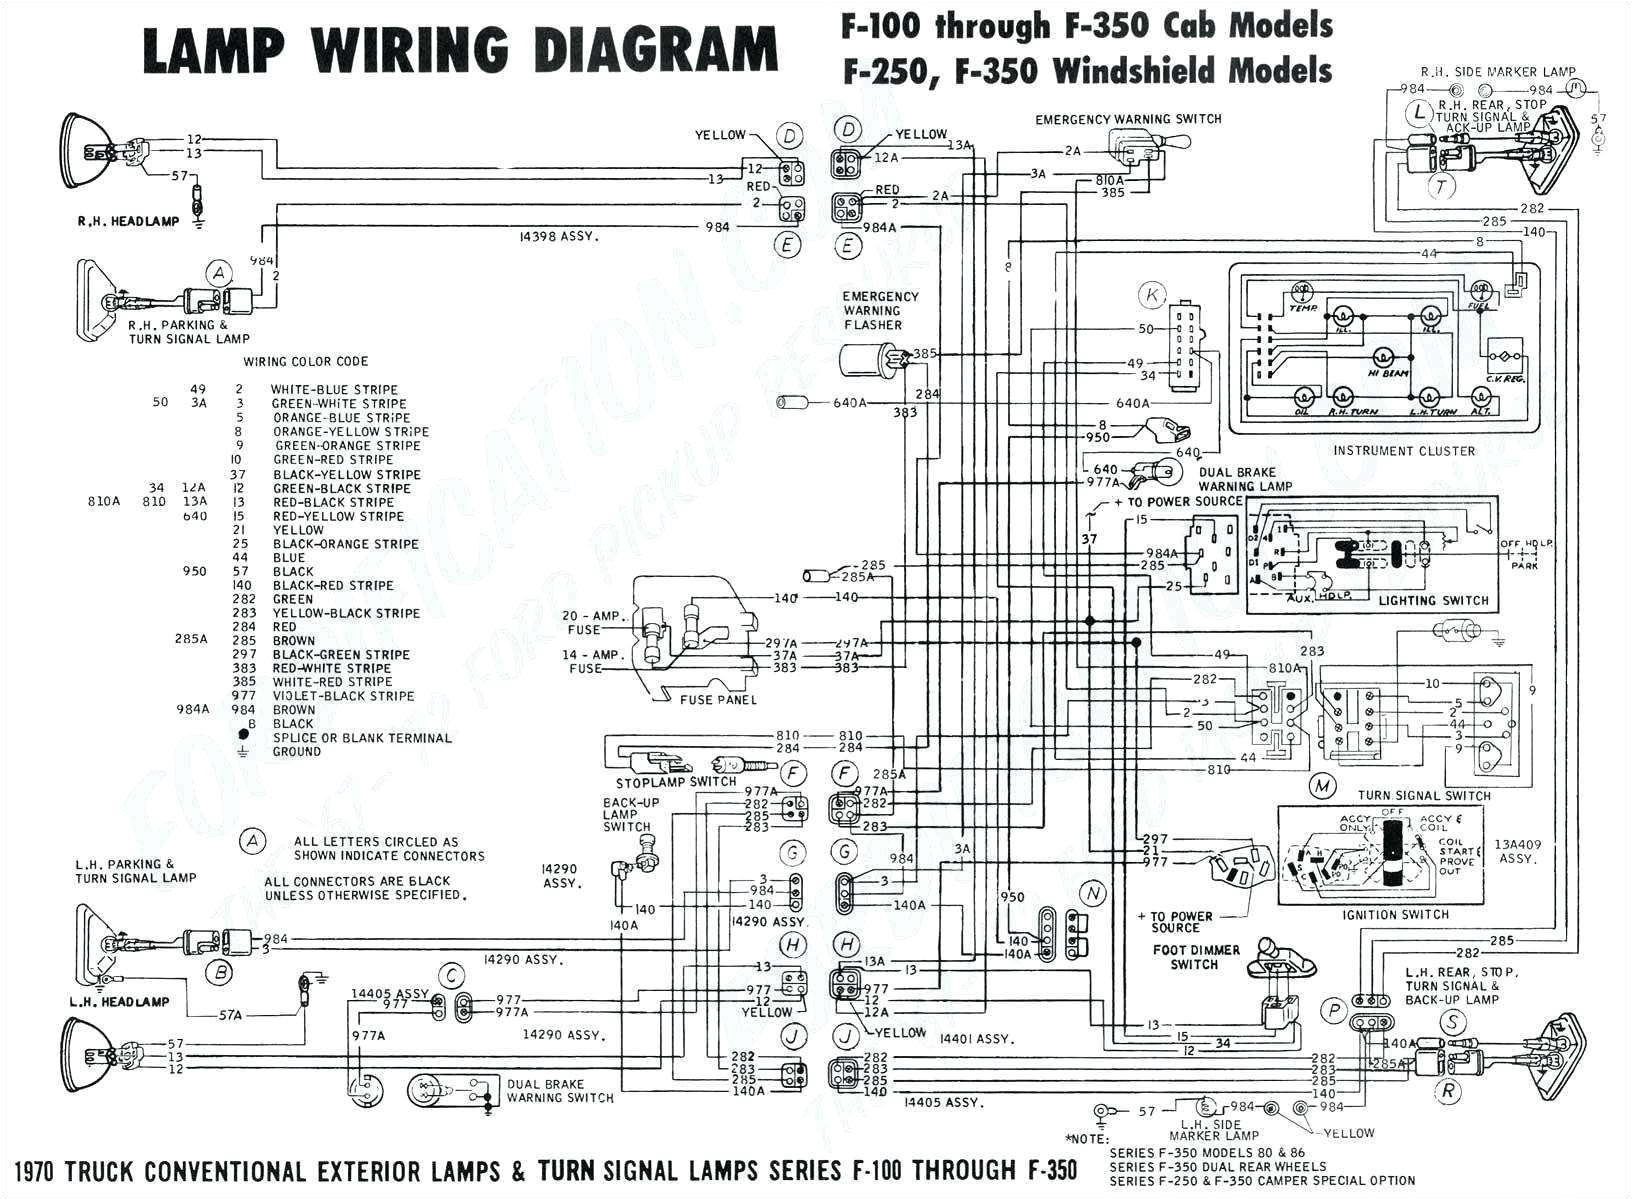 tail light wiring 2003 chevy s control wiring diagram 2003 chevy s10 tail light wiring diagram tail light wiring 2003 chevy s